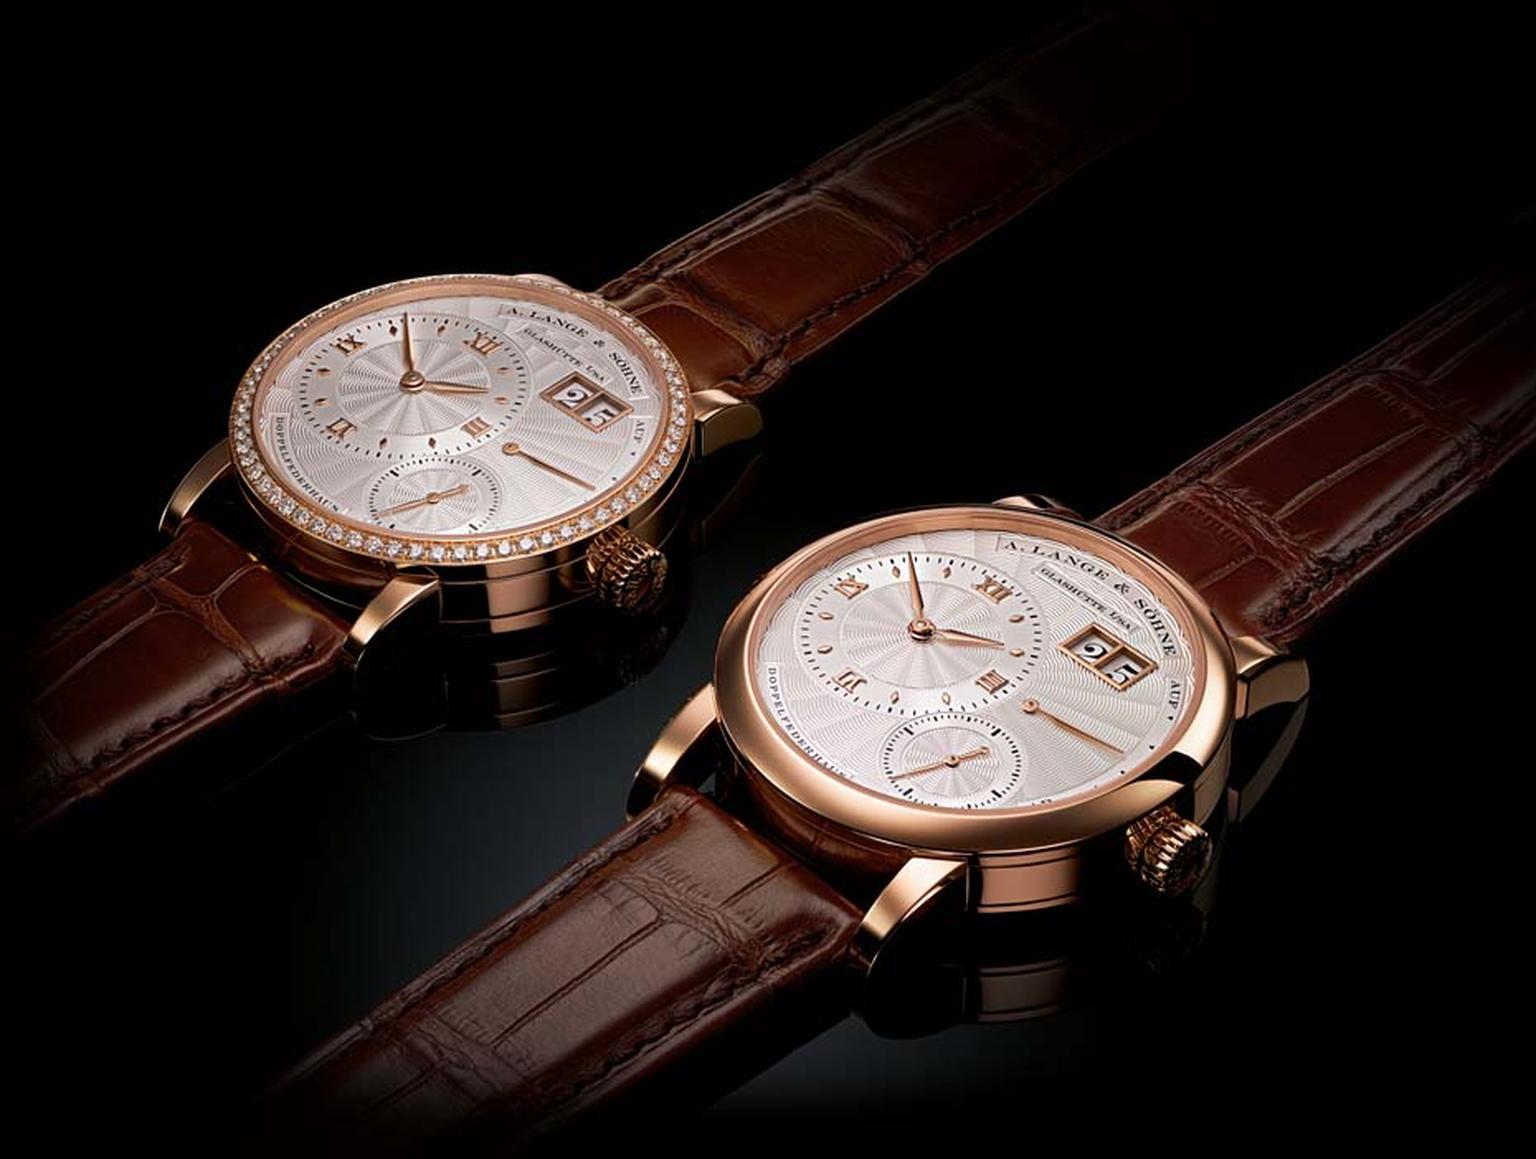 A.Lange & Söhne's Lange “20th Annniversary” limited edition watch set, launching at Watches&Wonders 2014 in Hong Kong, contains the Lange 1 and a Little Lange 1.